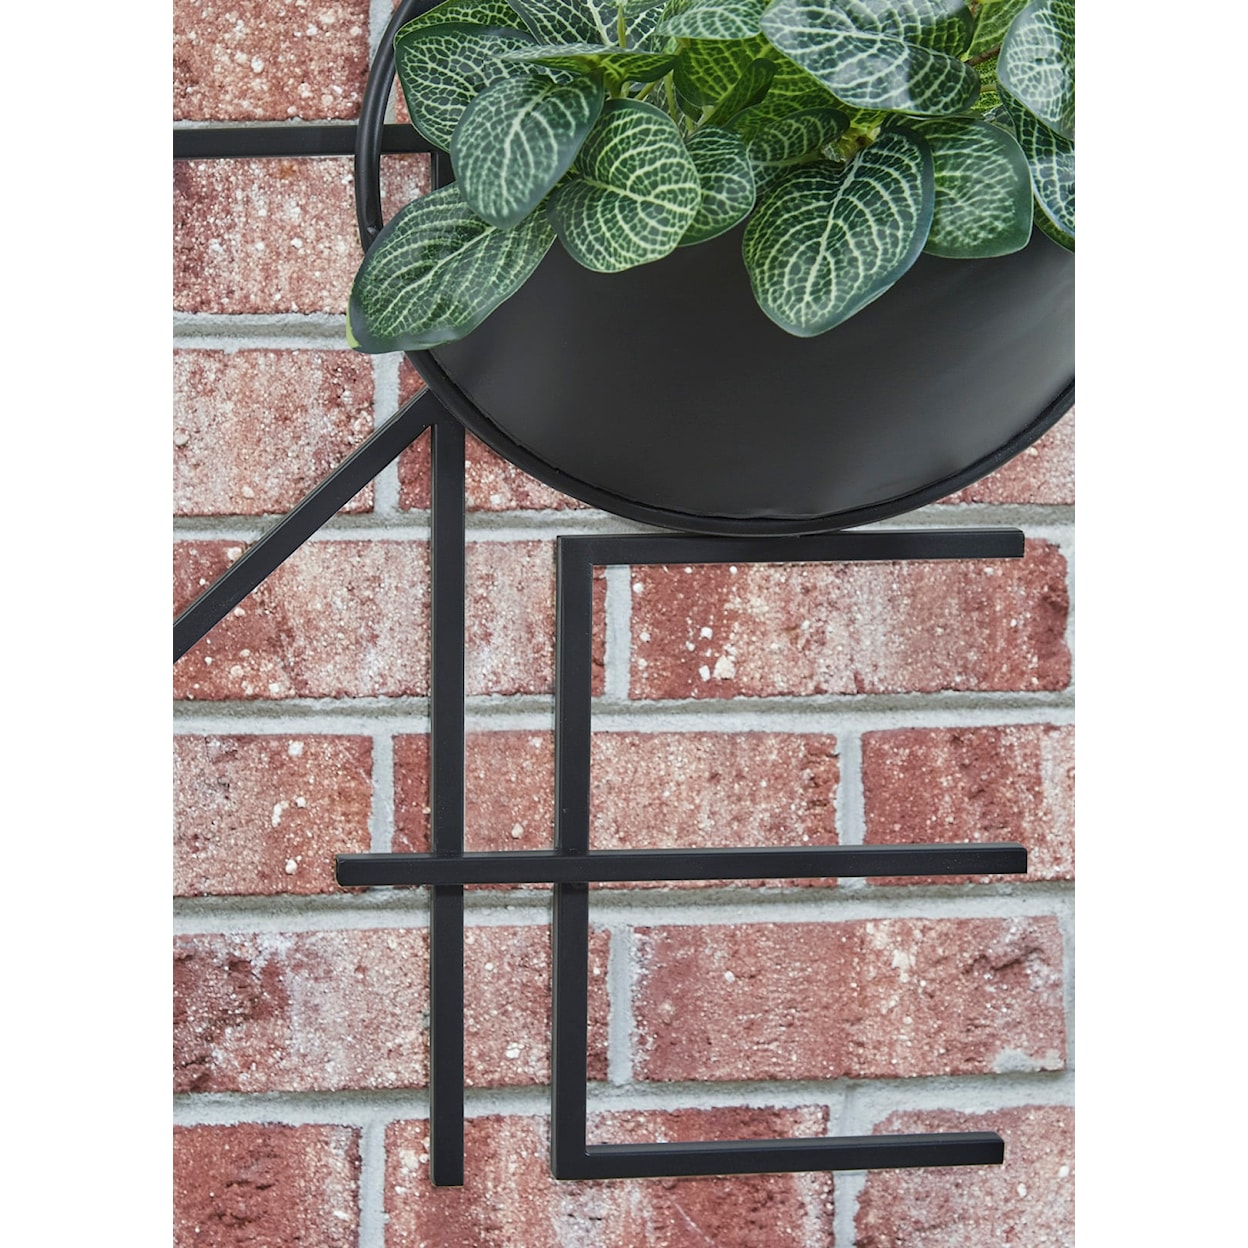 Signature Design by Ashley Wall Art Dunster Wall Planter